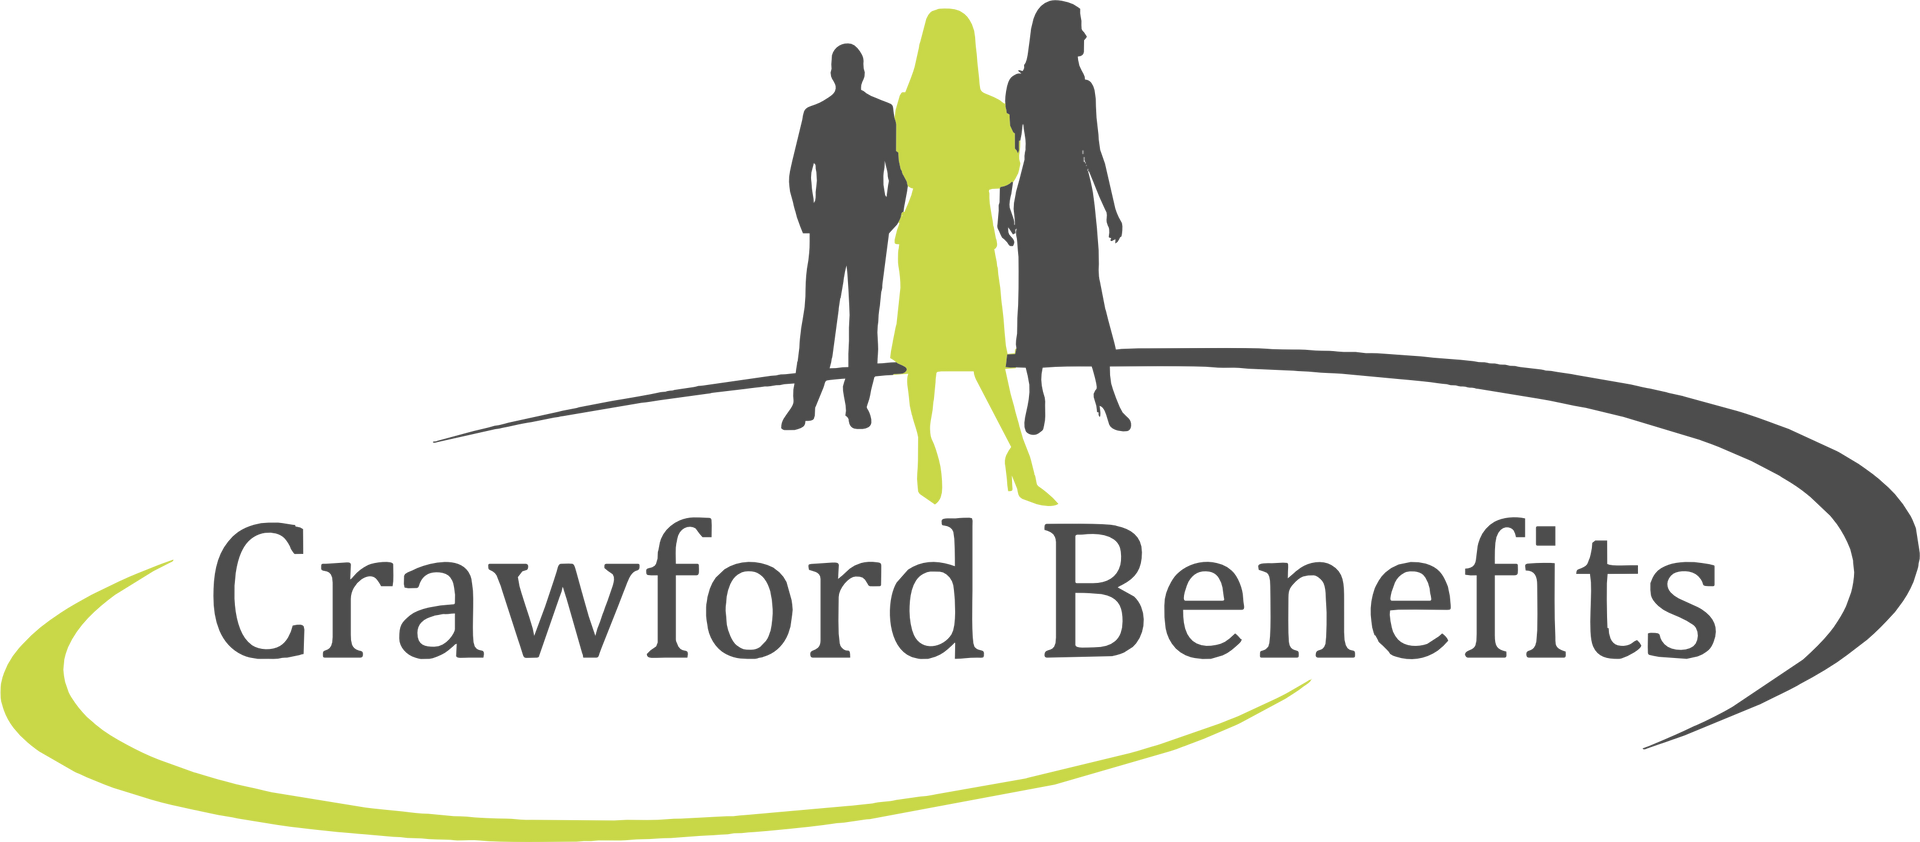 The logo for crawford benefits shows a man and a woman standing next to each other.